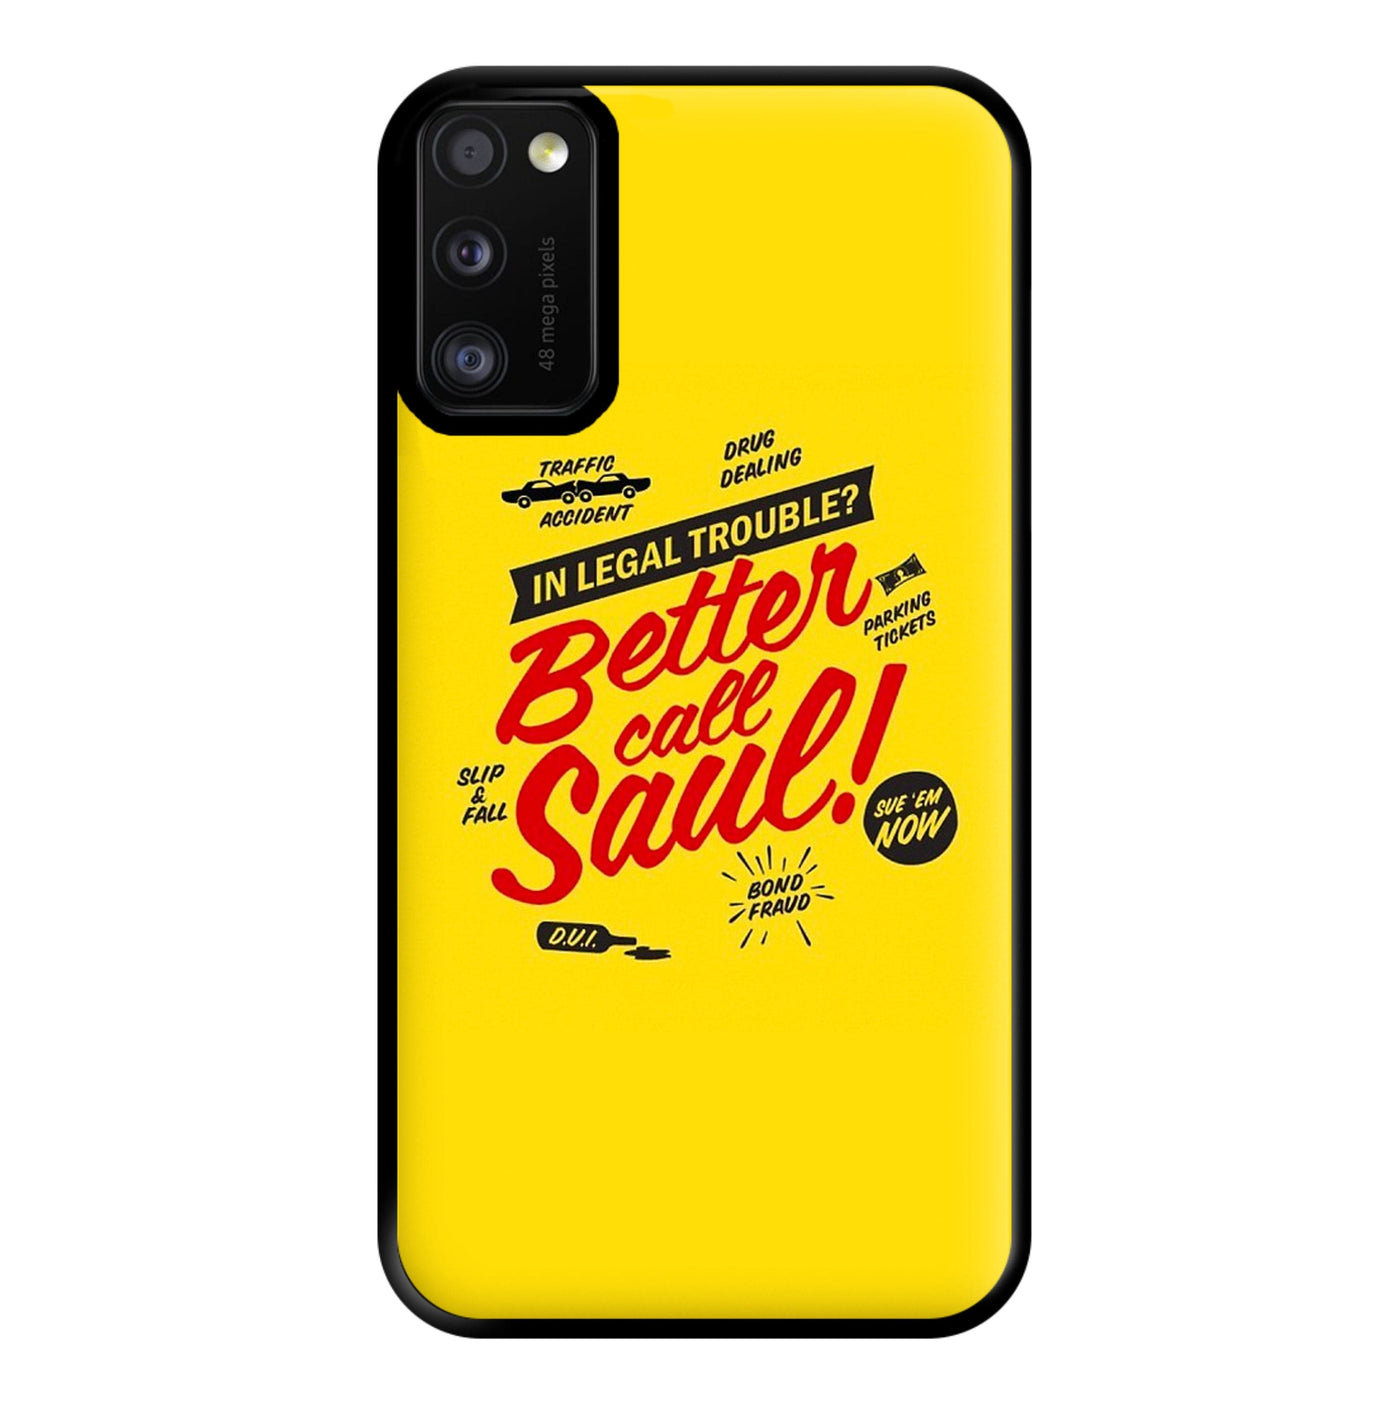 In Legal Trouble? Better Call Saul Phone Case